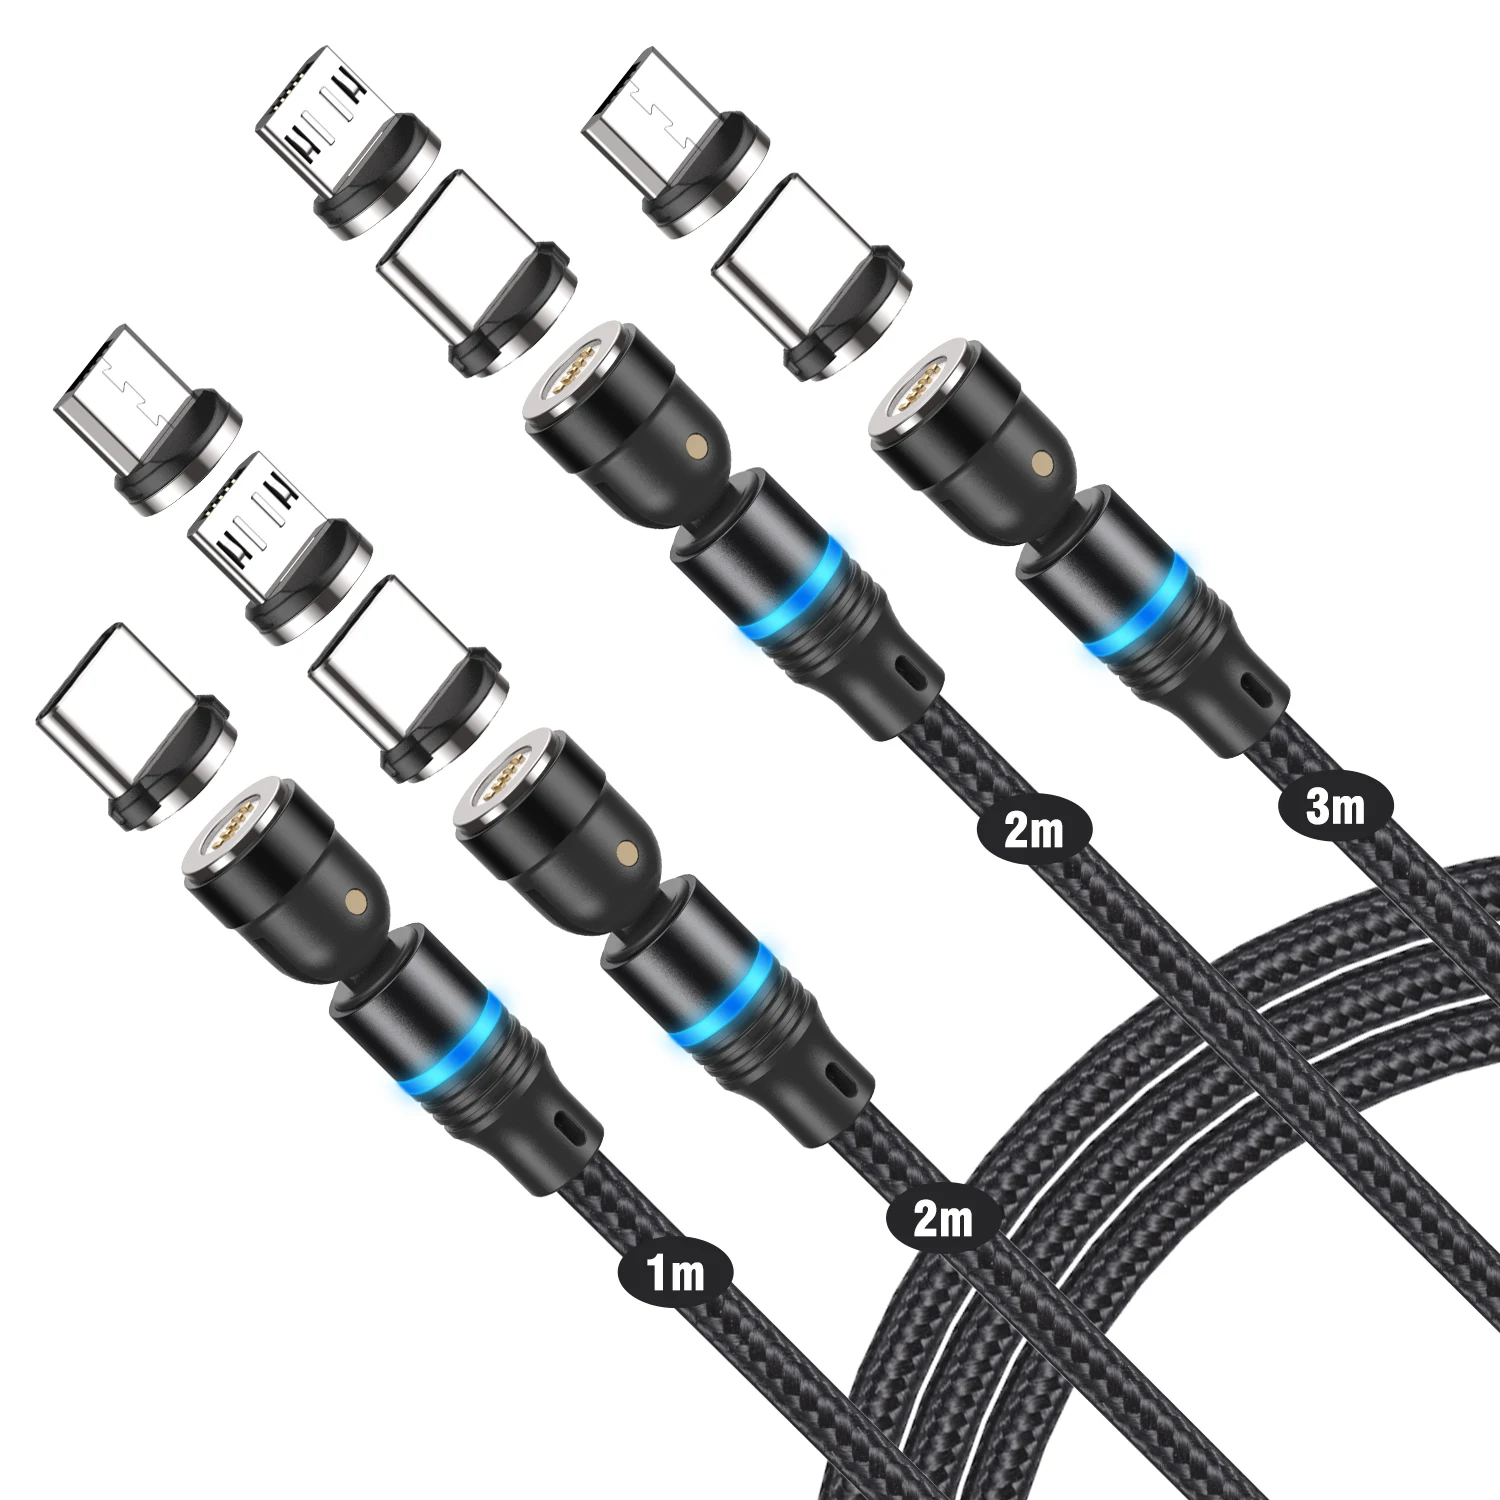 

CVY 540 Rotation 3A Magnetic Cable Micro Usb Type C Cable Phone Charging Cord 5pin Fast Charging Cable For iPhone Xiaomi